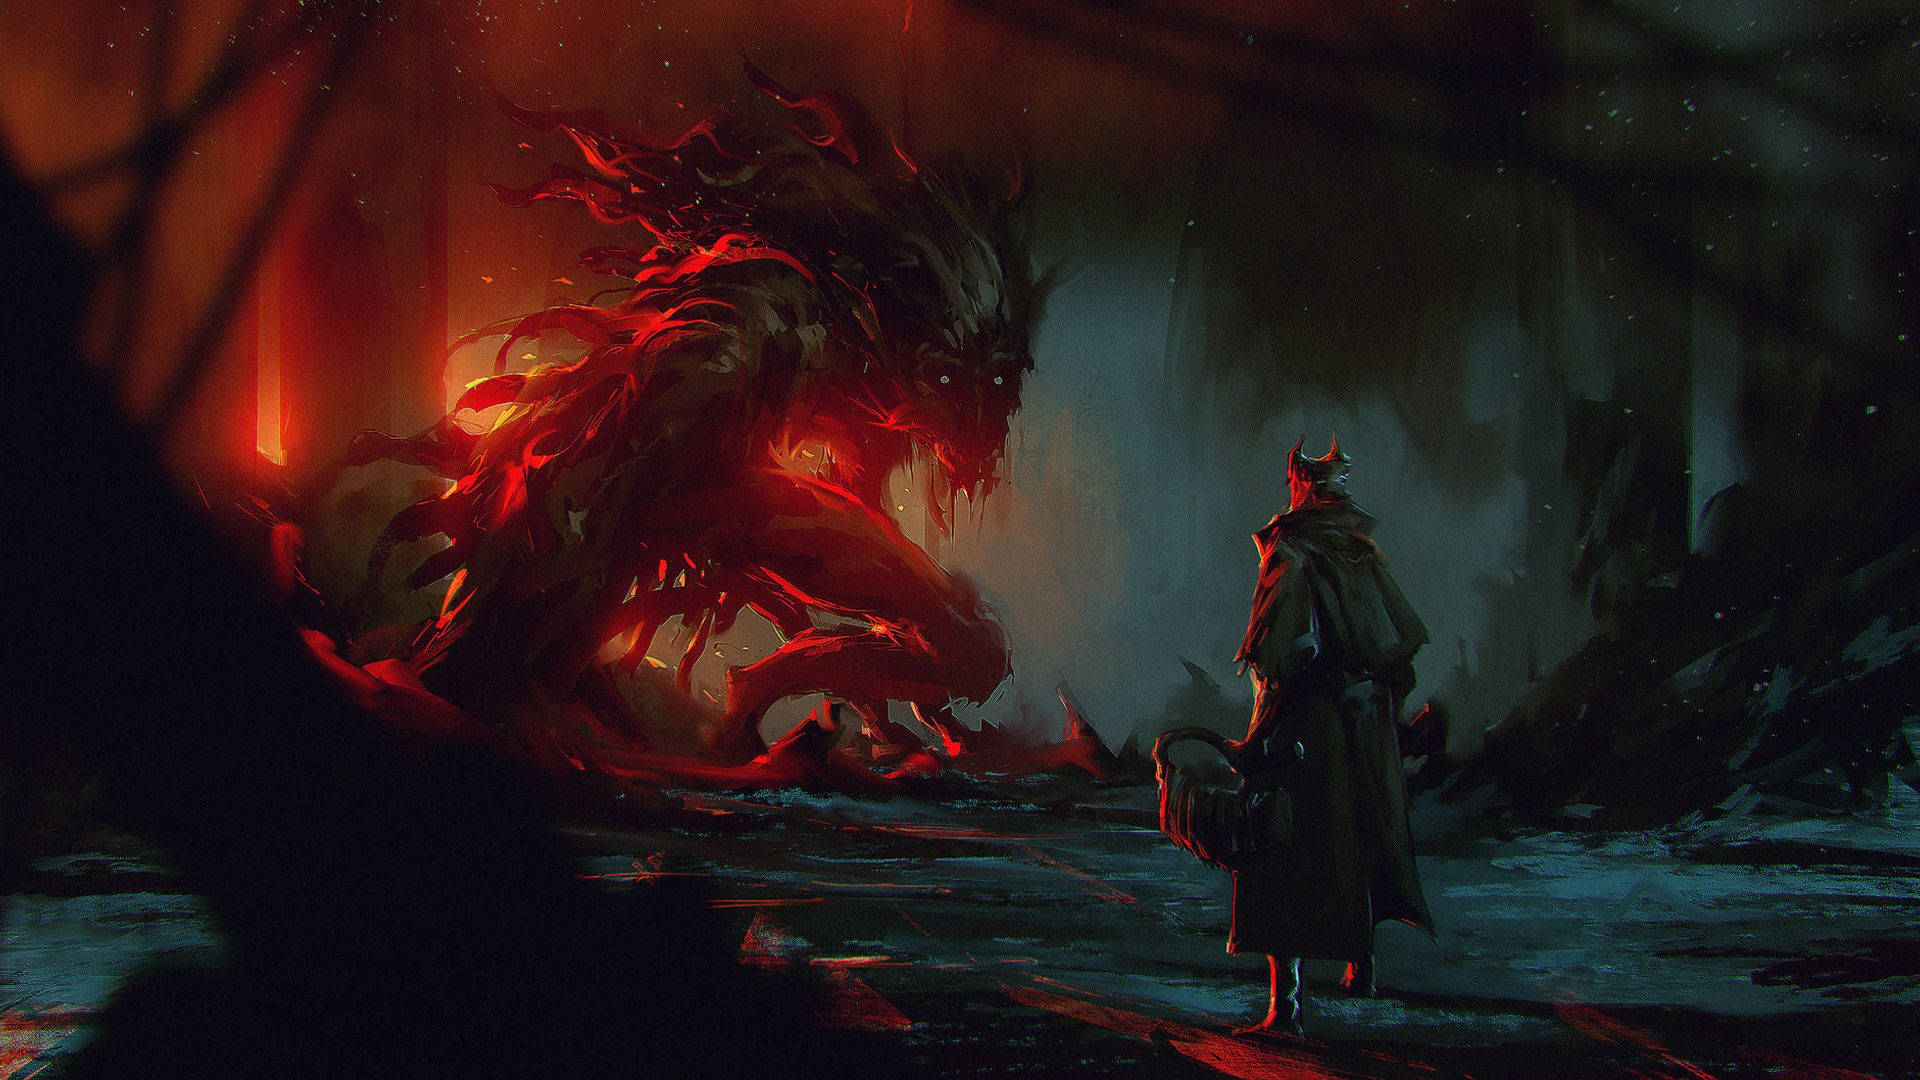 Carnage erupts as the Cleric Beast confronts an unlucky hunter in Bloodborne Wallpaper